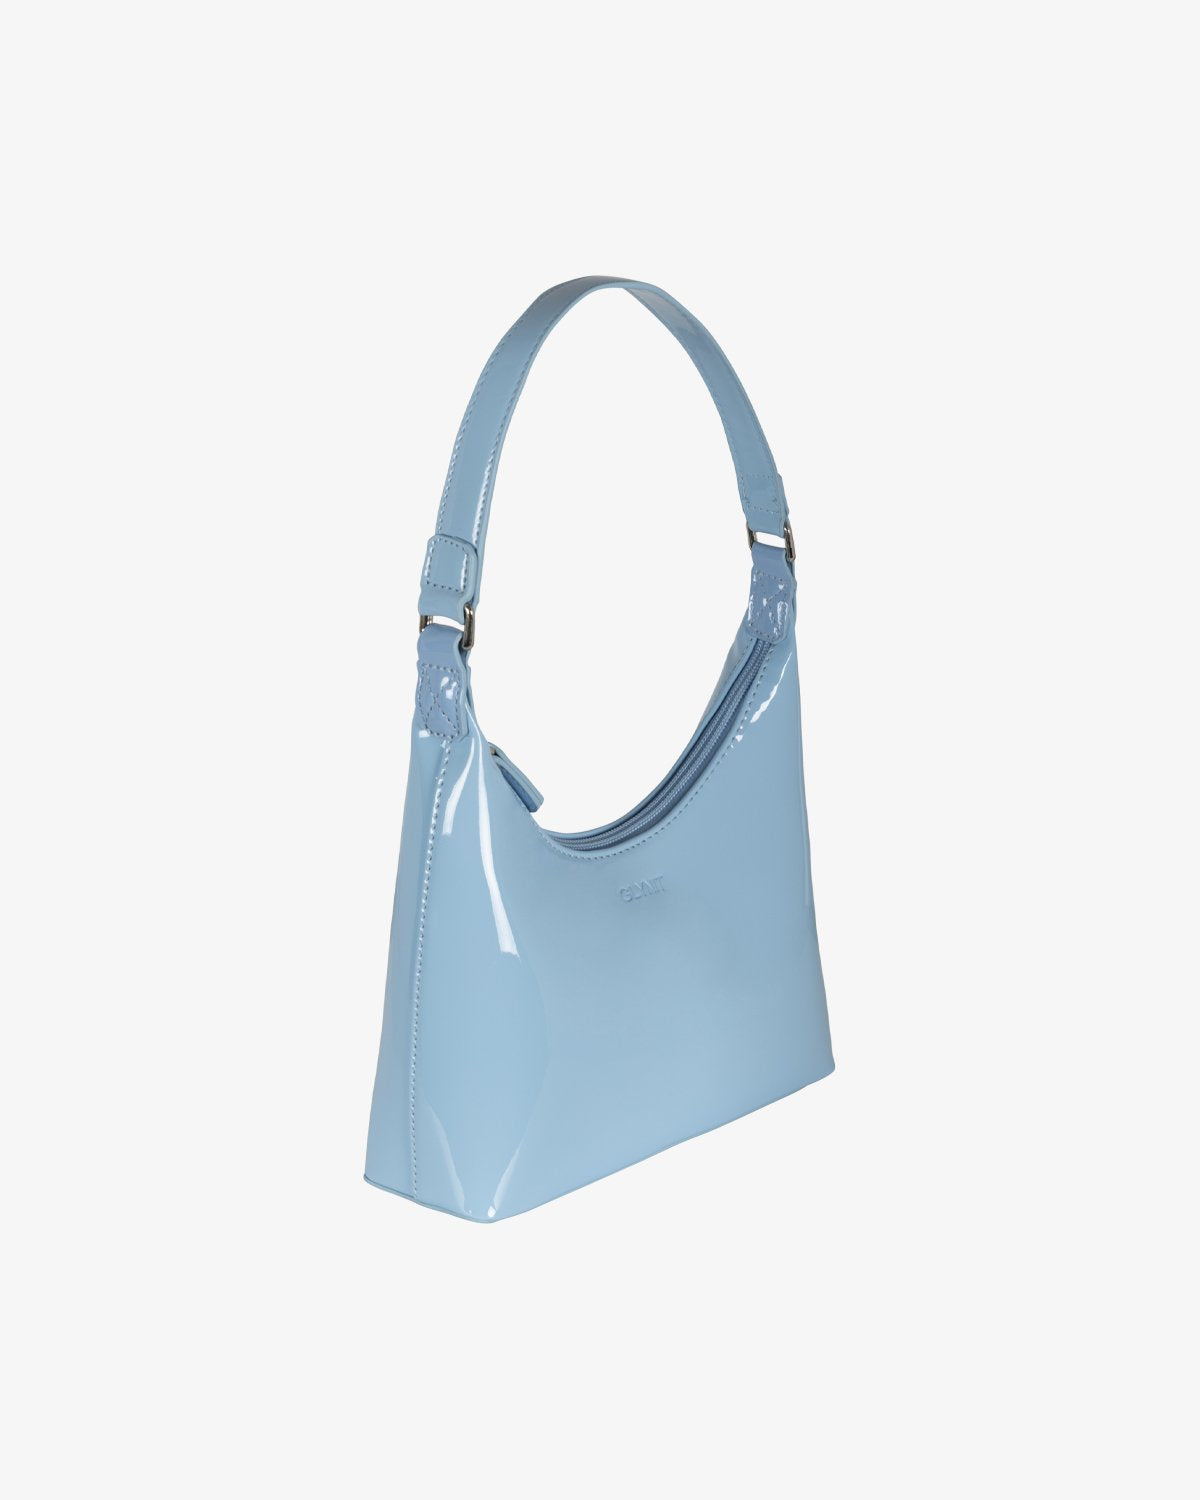 THE MOLLY BAG - POWDER BLUE - EXCLUSIVE Bags from GLYNIT - Just $69.00! SHOP NOW AT IAMINHATELOVE BOTH IN STORE FOR CYPRUS AND ONLINE WORLDWIDE